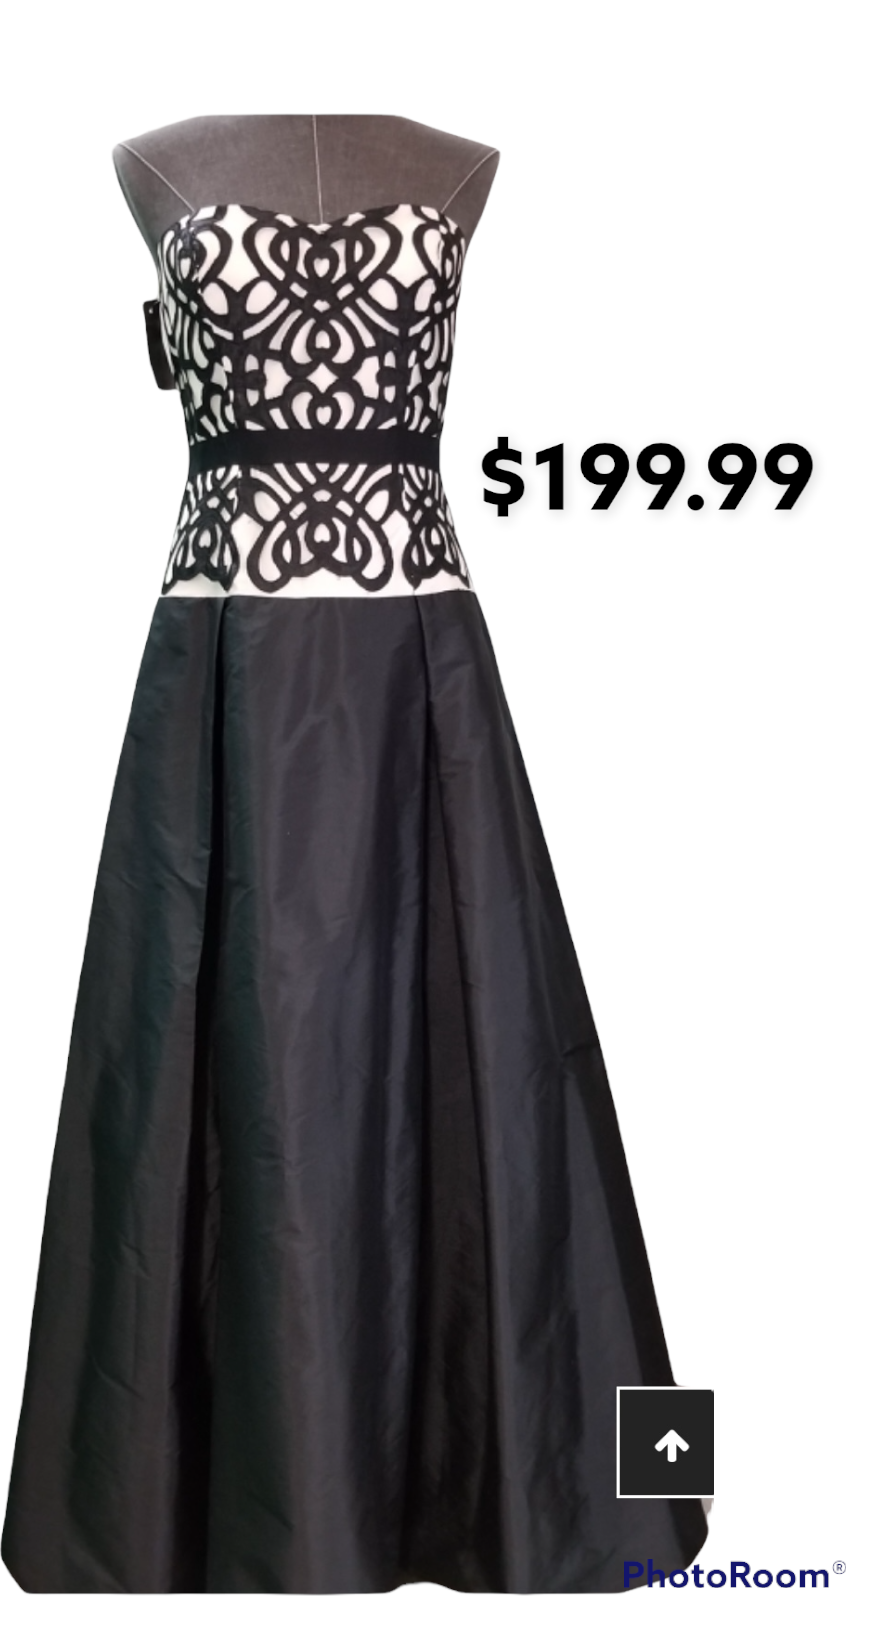 Aiden Mattox strapless formal with embellished applique top. Strapless with back zip closure. Full satin skirt with POCKETS!
Black and cream
Size: 6
NO RETURNS ON PROM DRESSES!